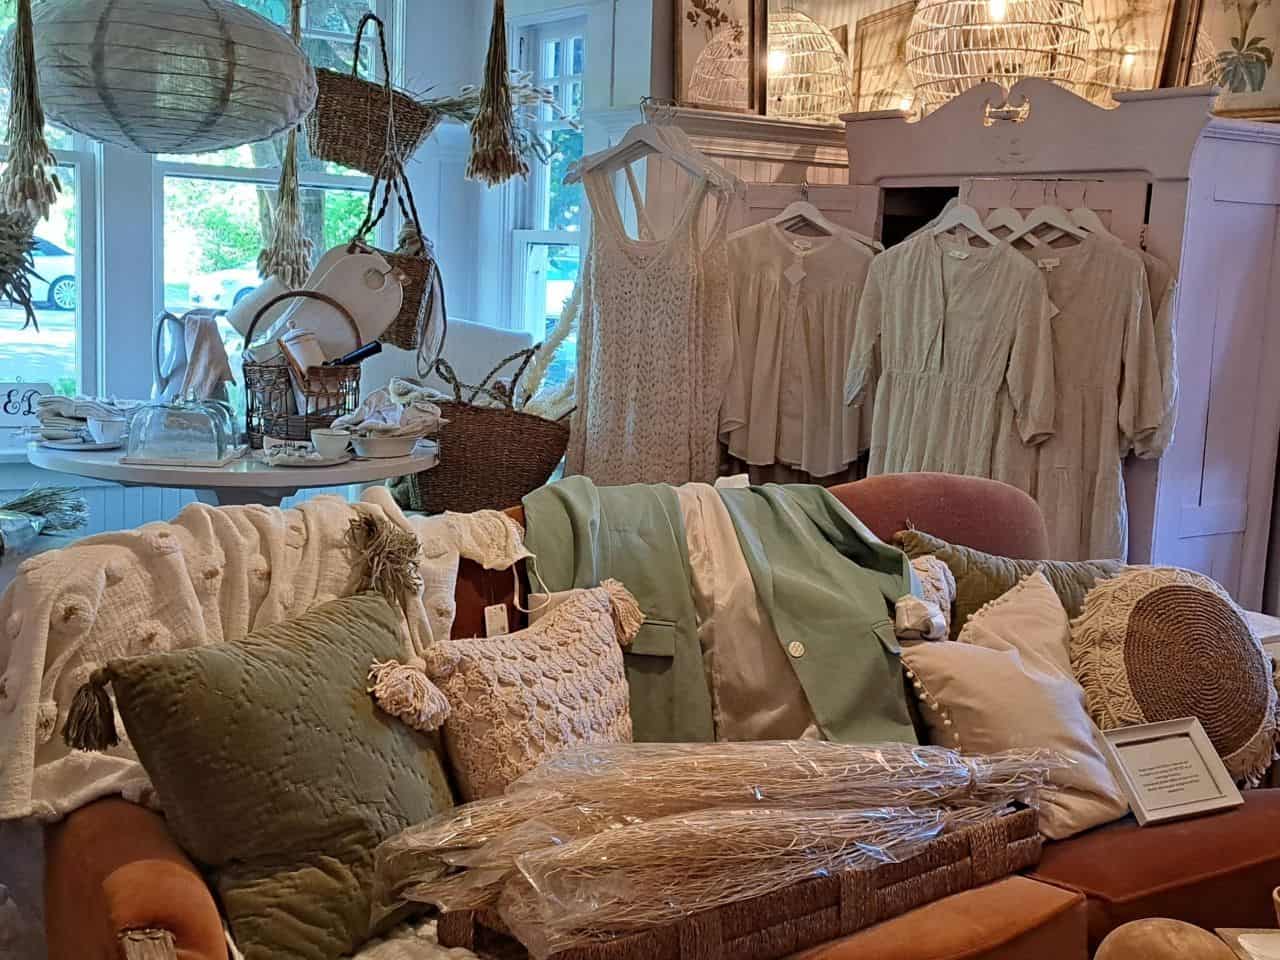 Home décor and vintage clothing for sale at The Little White House